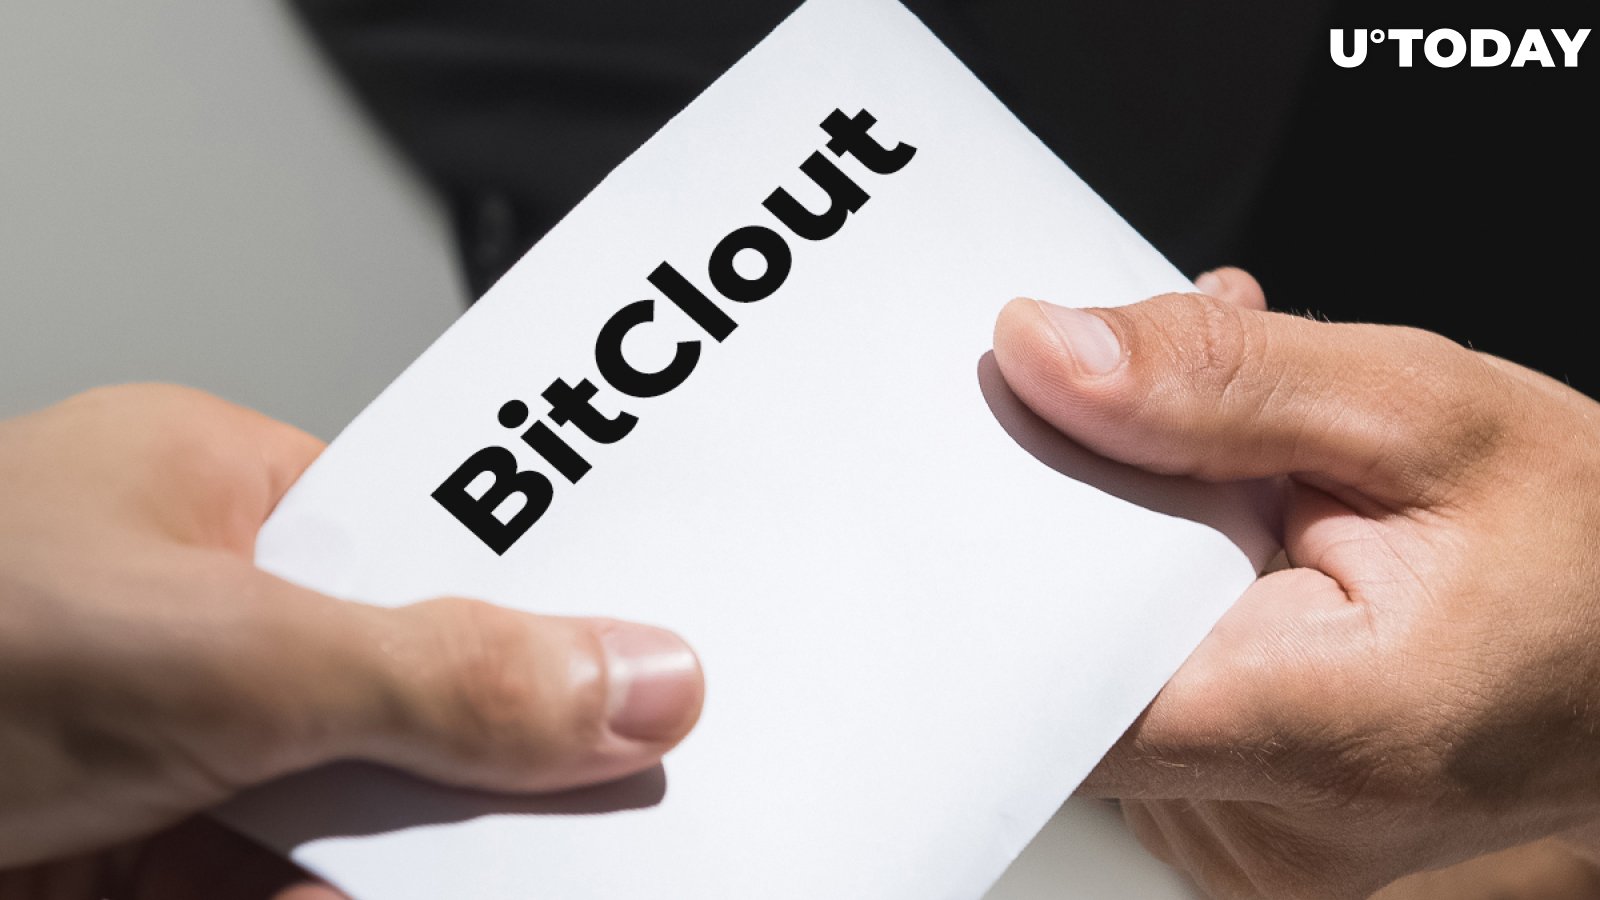 Mysterious BitClout Service Receives "Cease-and-Desist Letter" From Top Lawyers, Here's Why